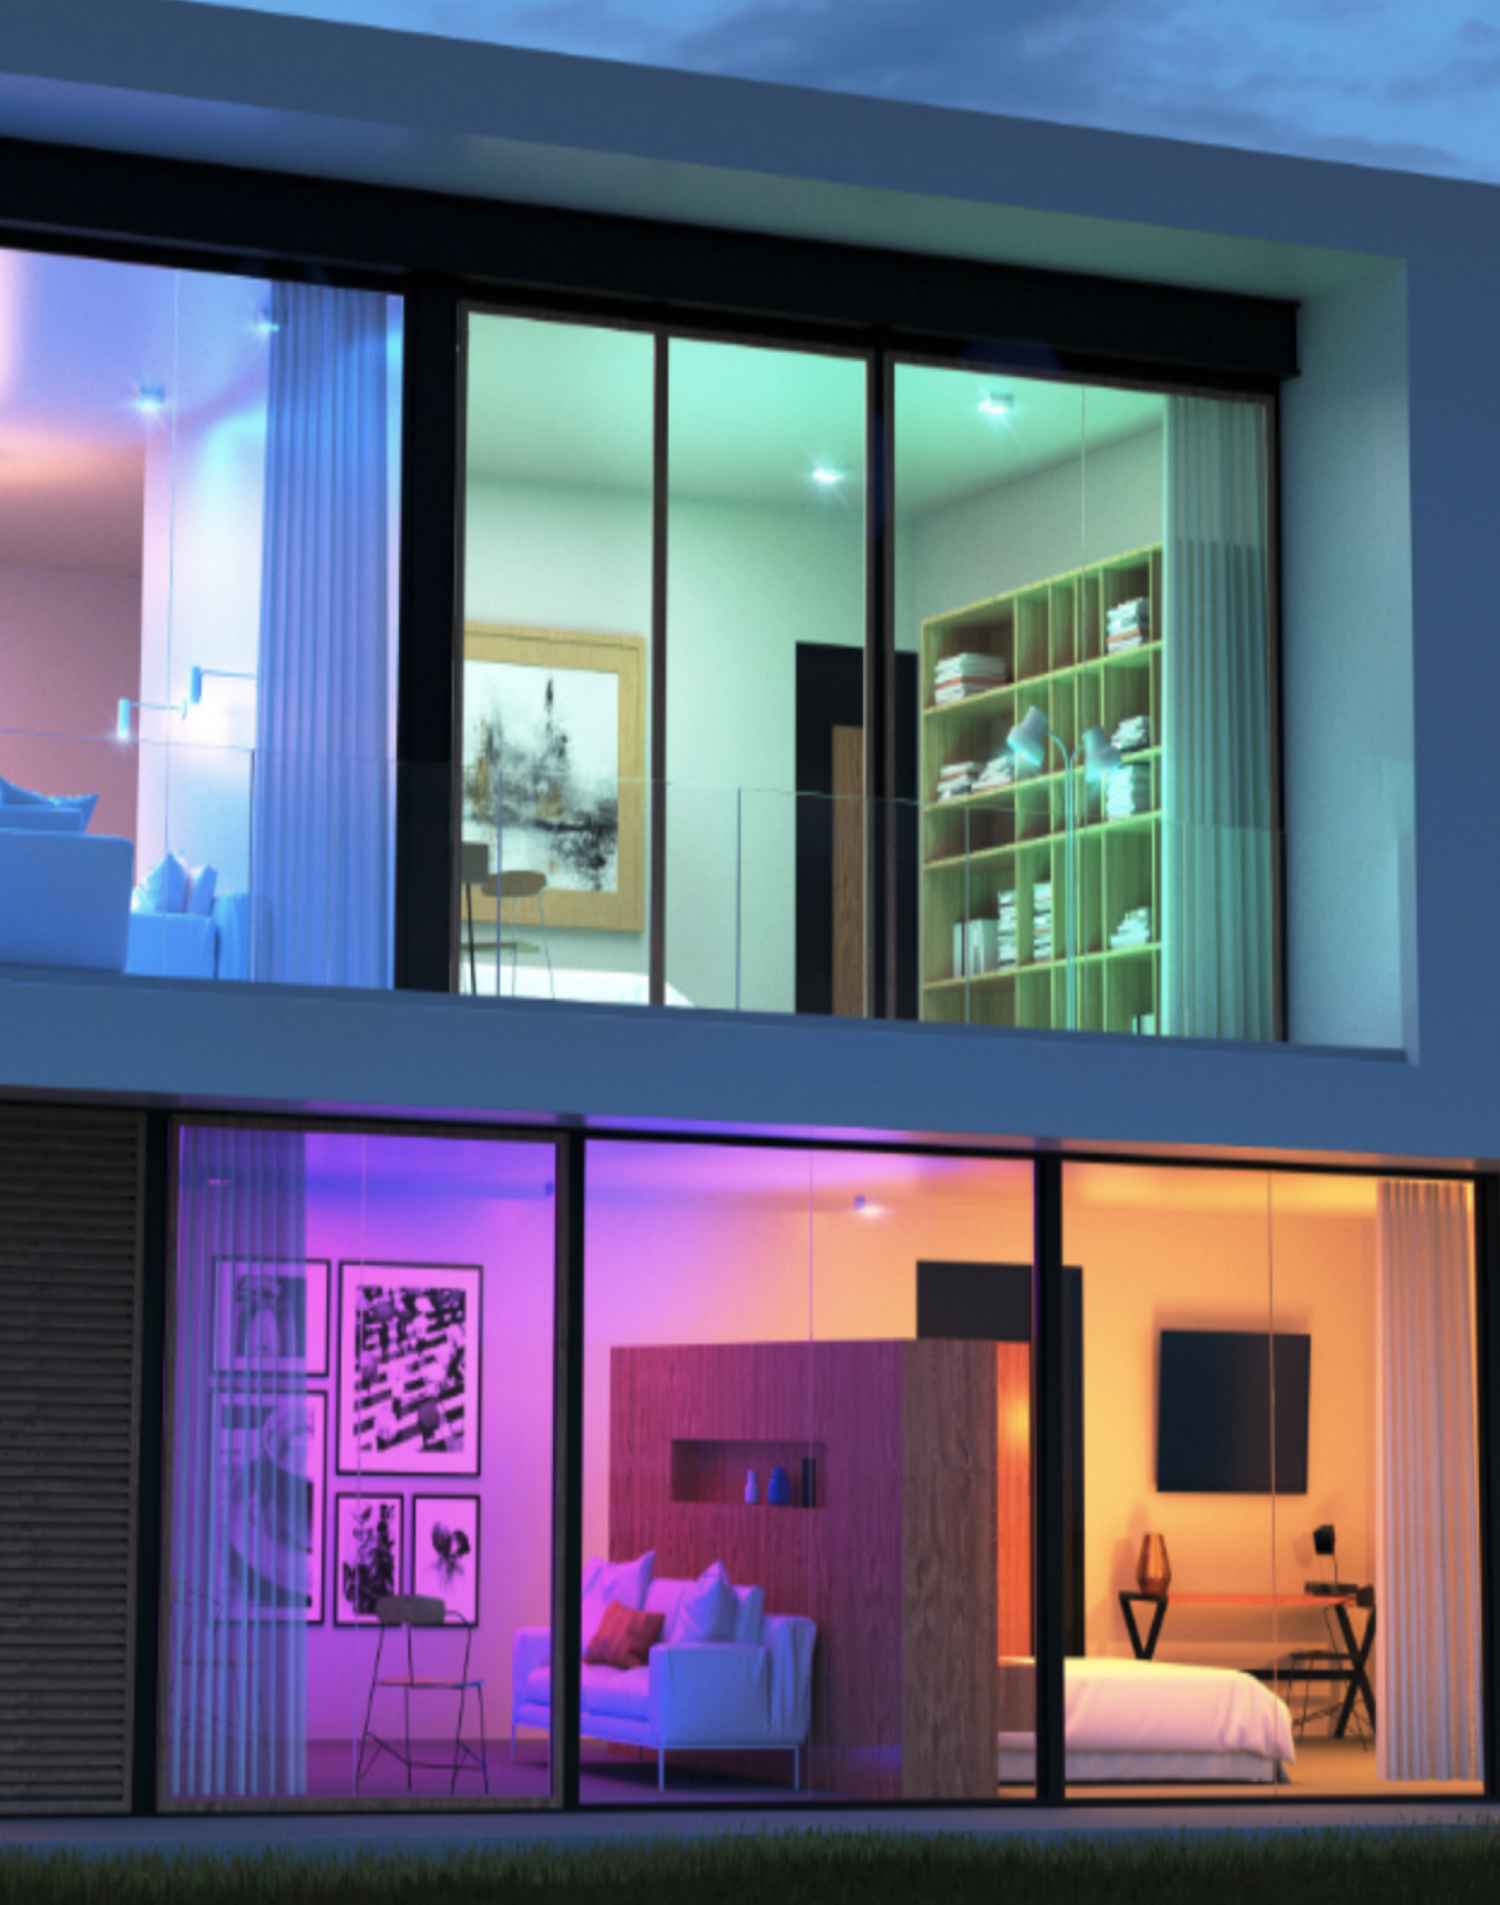 wyze color bulb lighting each room a different color